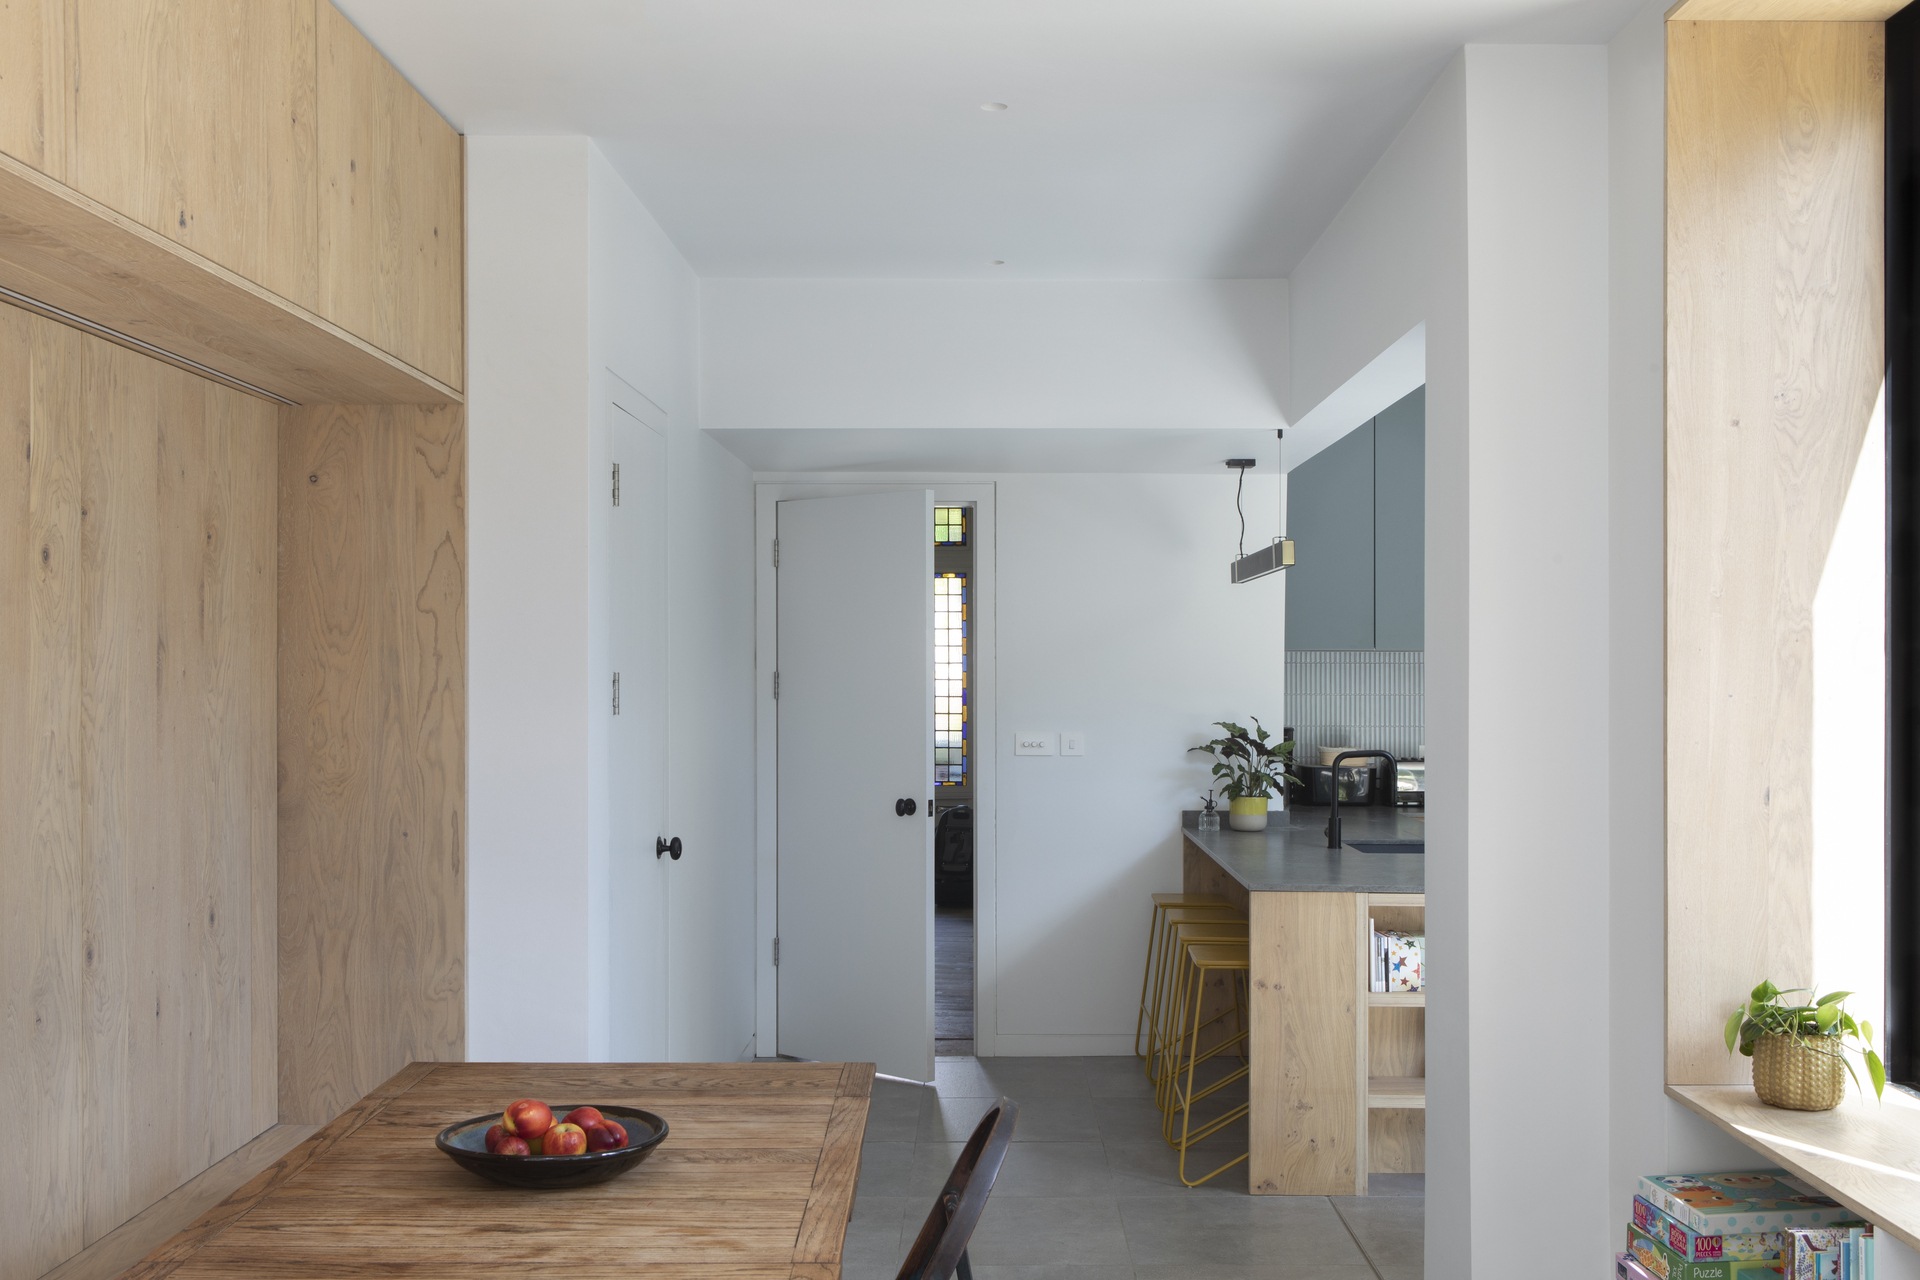 In improving theground floor of a fourbedroom house in Glasgow, Scotland, practice Loader Monteith moved the hallway door to the kitchen along the wall by the door’s width. This minor alteration provides a straight route from the front door to the back of the house